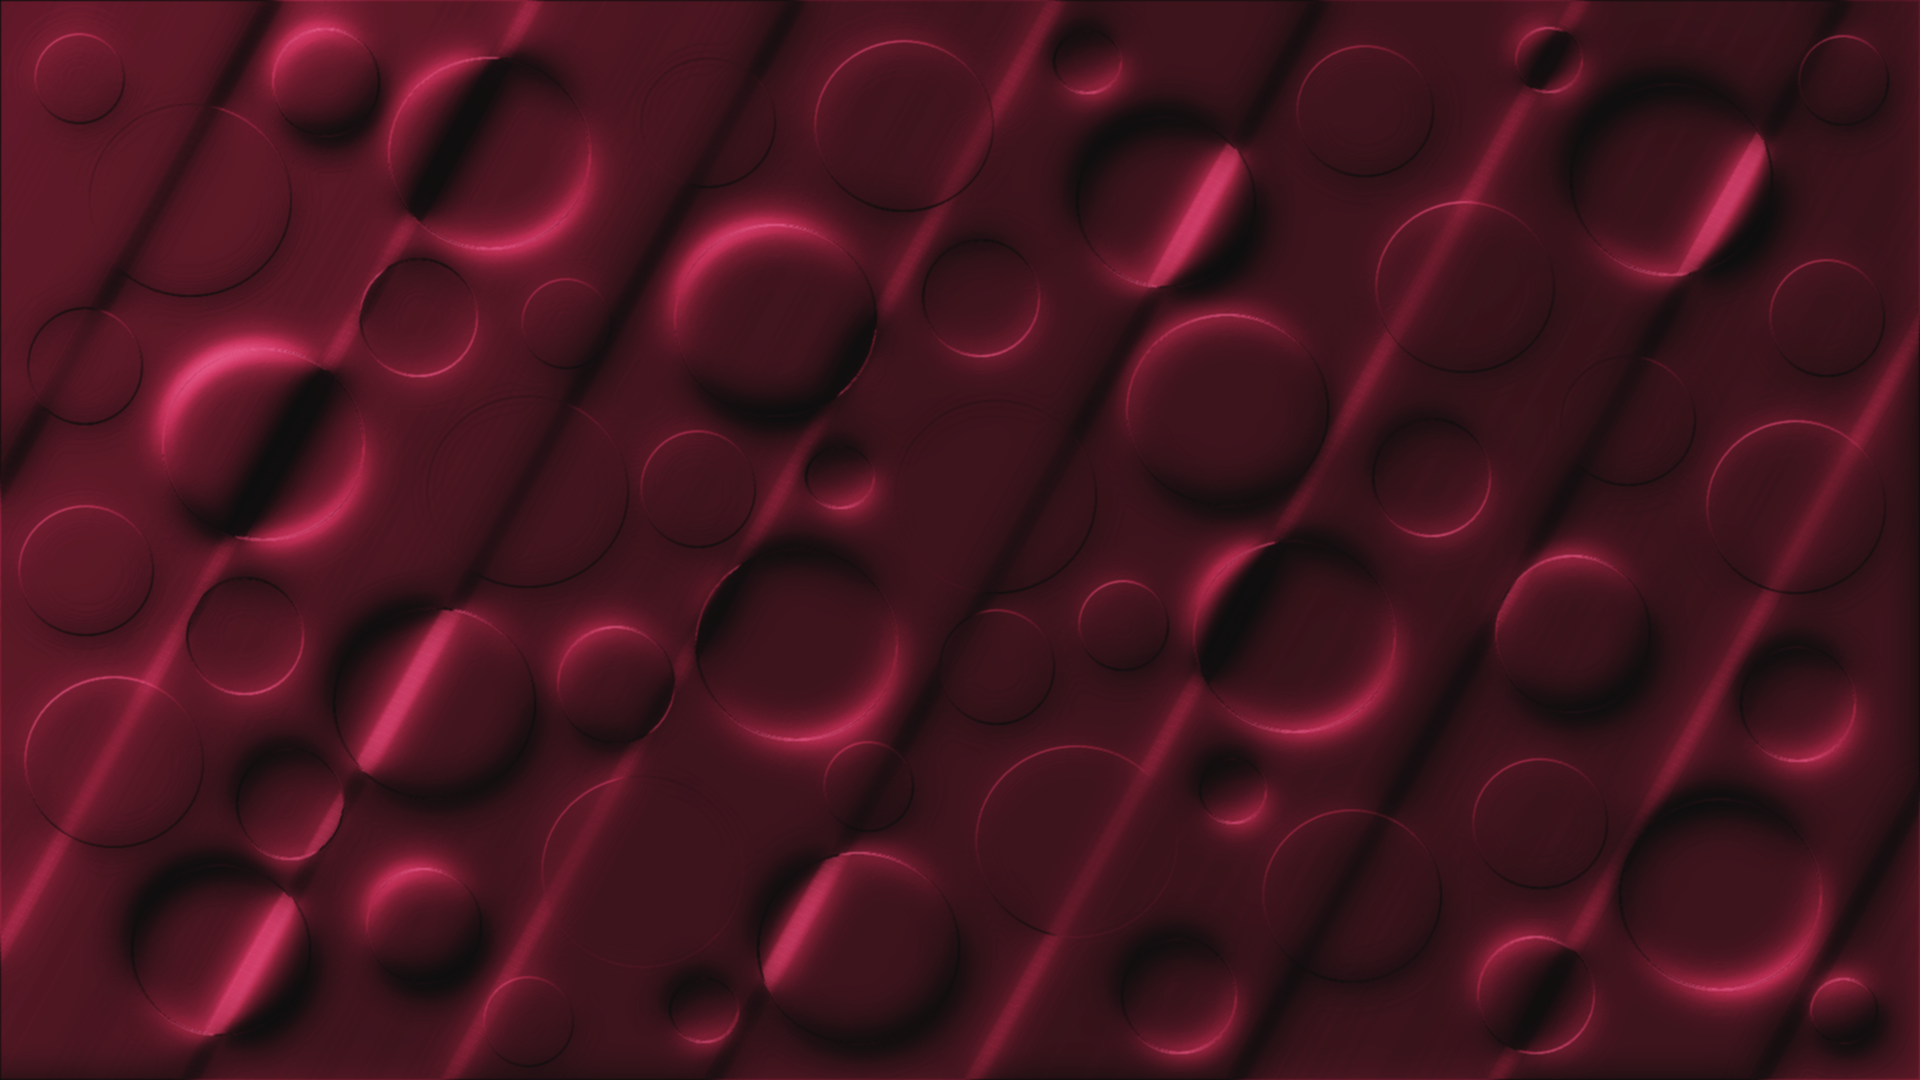 Reddish Brown Abstract 3D Circles by lonewolf6738 by lonewolf6738